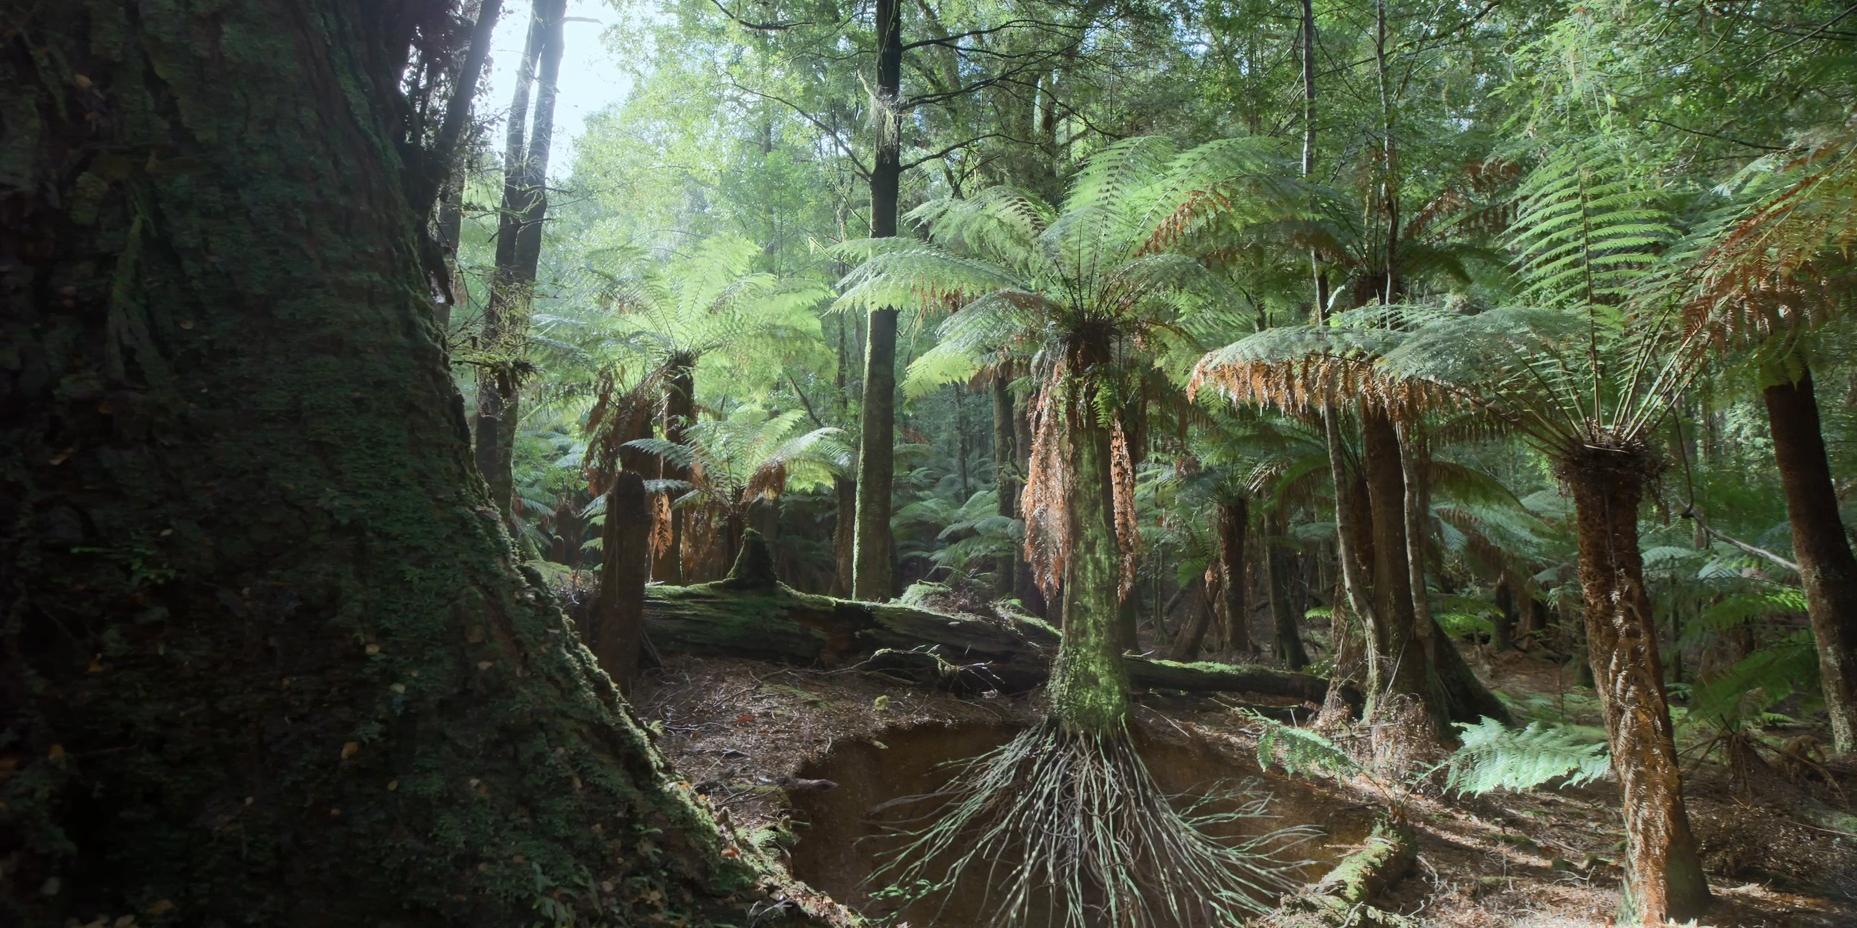 The Hong Kong Space Museum will launch a new dome show "Nature's Hidden Kingdom", at its Space Theatre tomorrow (January 13). Picture shows one of the most ancient temperate rainforests on Earth, that of Tarkine in Tasmania, Australia. Over 90 per cent of plants rely on fungi to connect to their roots and shuttle nutrients to the plant. A single plant can form relationships with hundreds of different fungi and a single fungus can connect to more than one plant. This underground shared network is often called the "wood wide web".